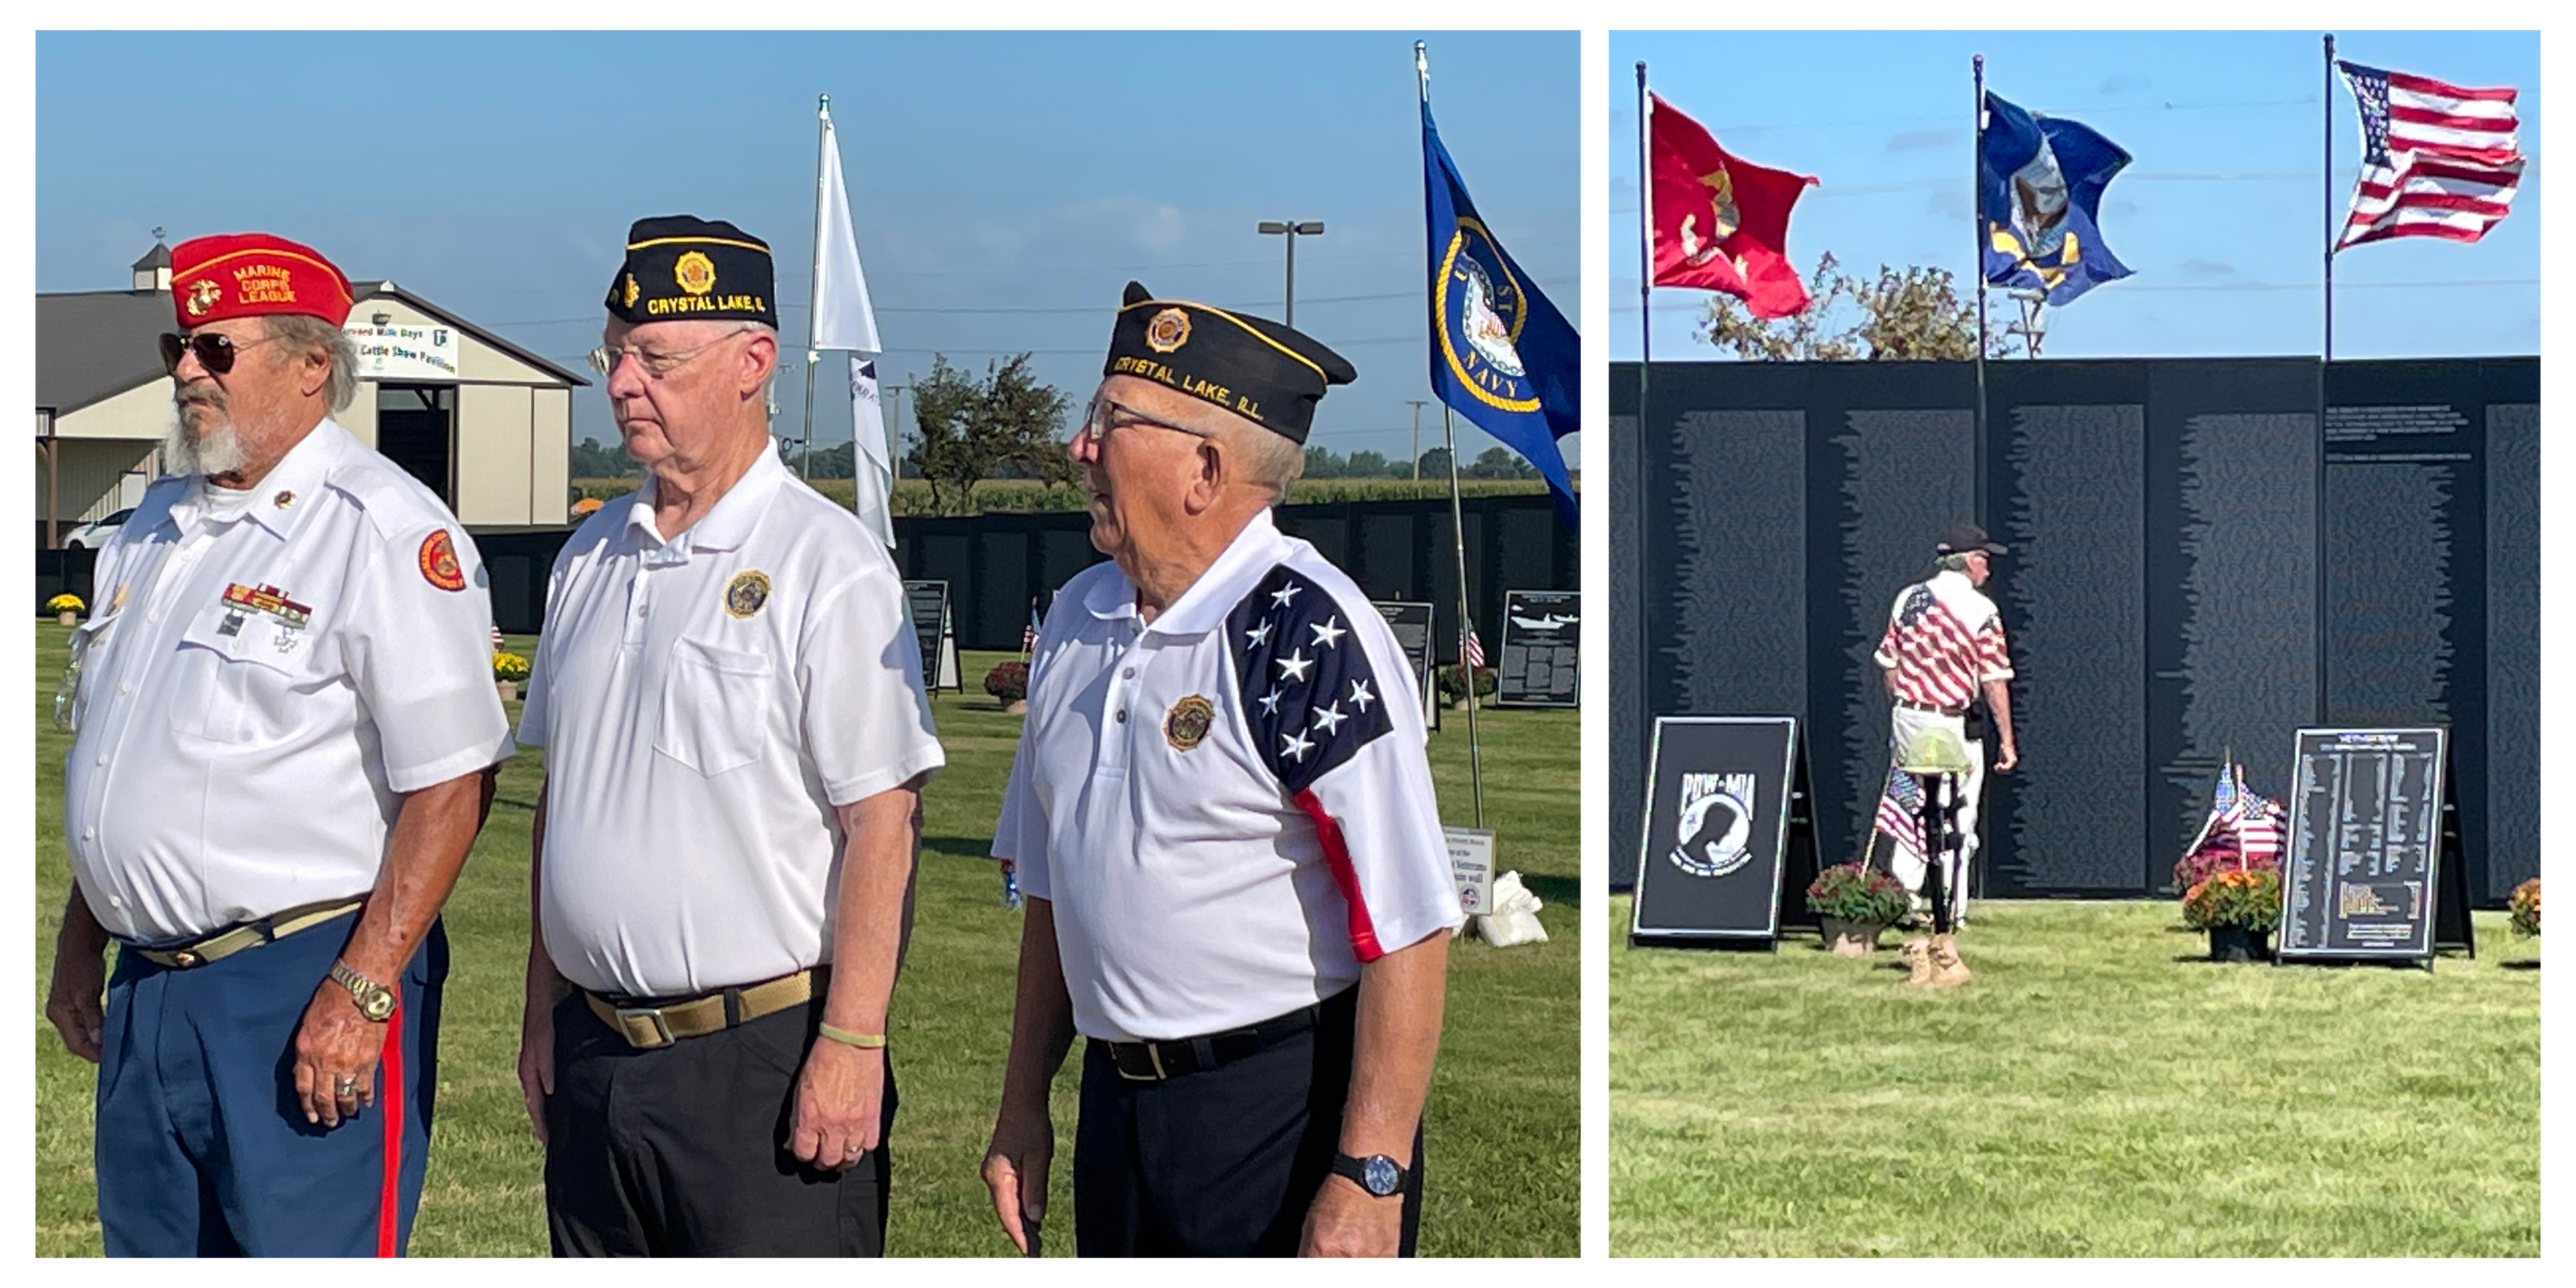 Various local and county American Legion veterans attend the tribute to participate in numerous ceremonies (left). A local veteran pays respect to his fallen comrades (right).